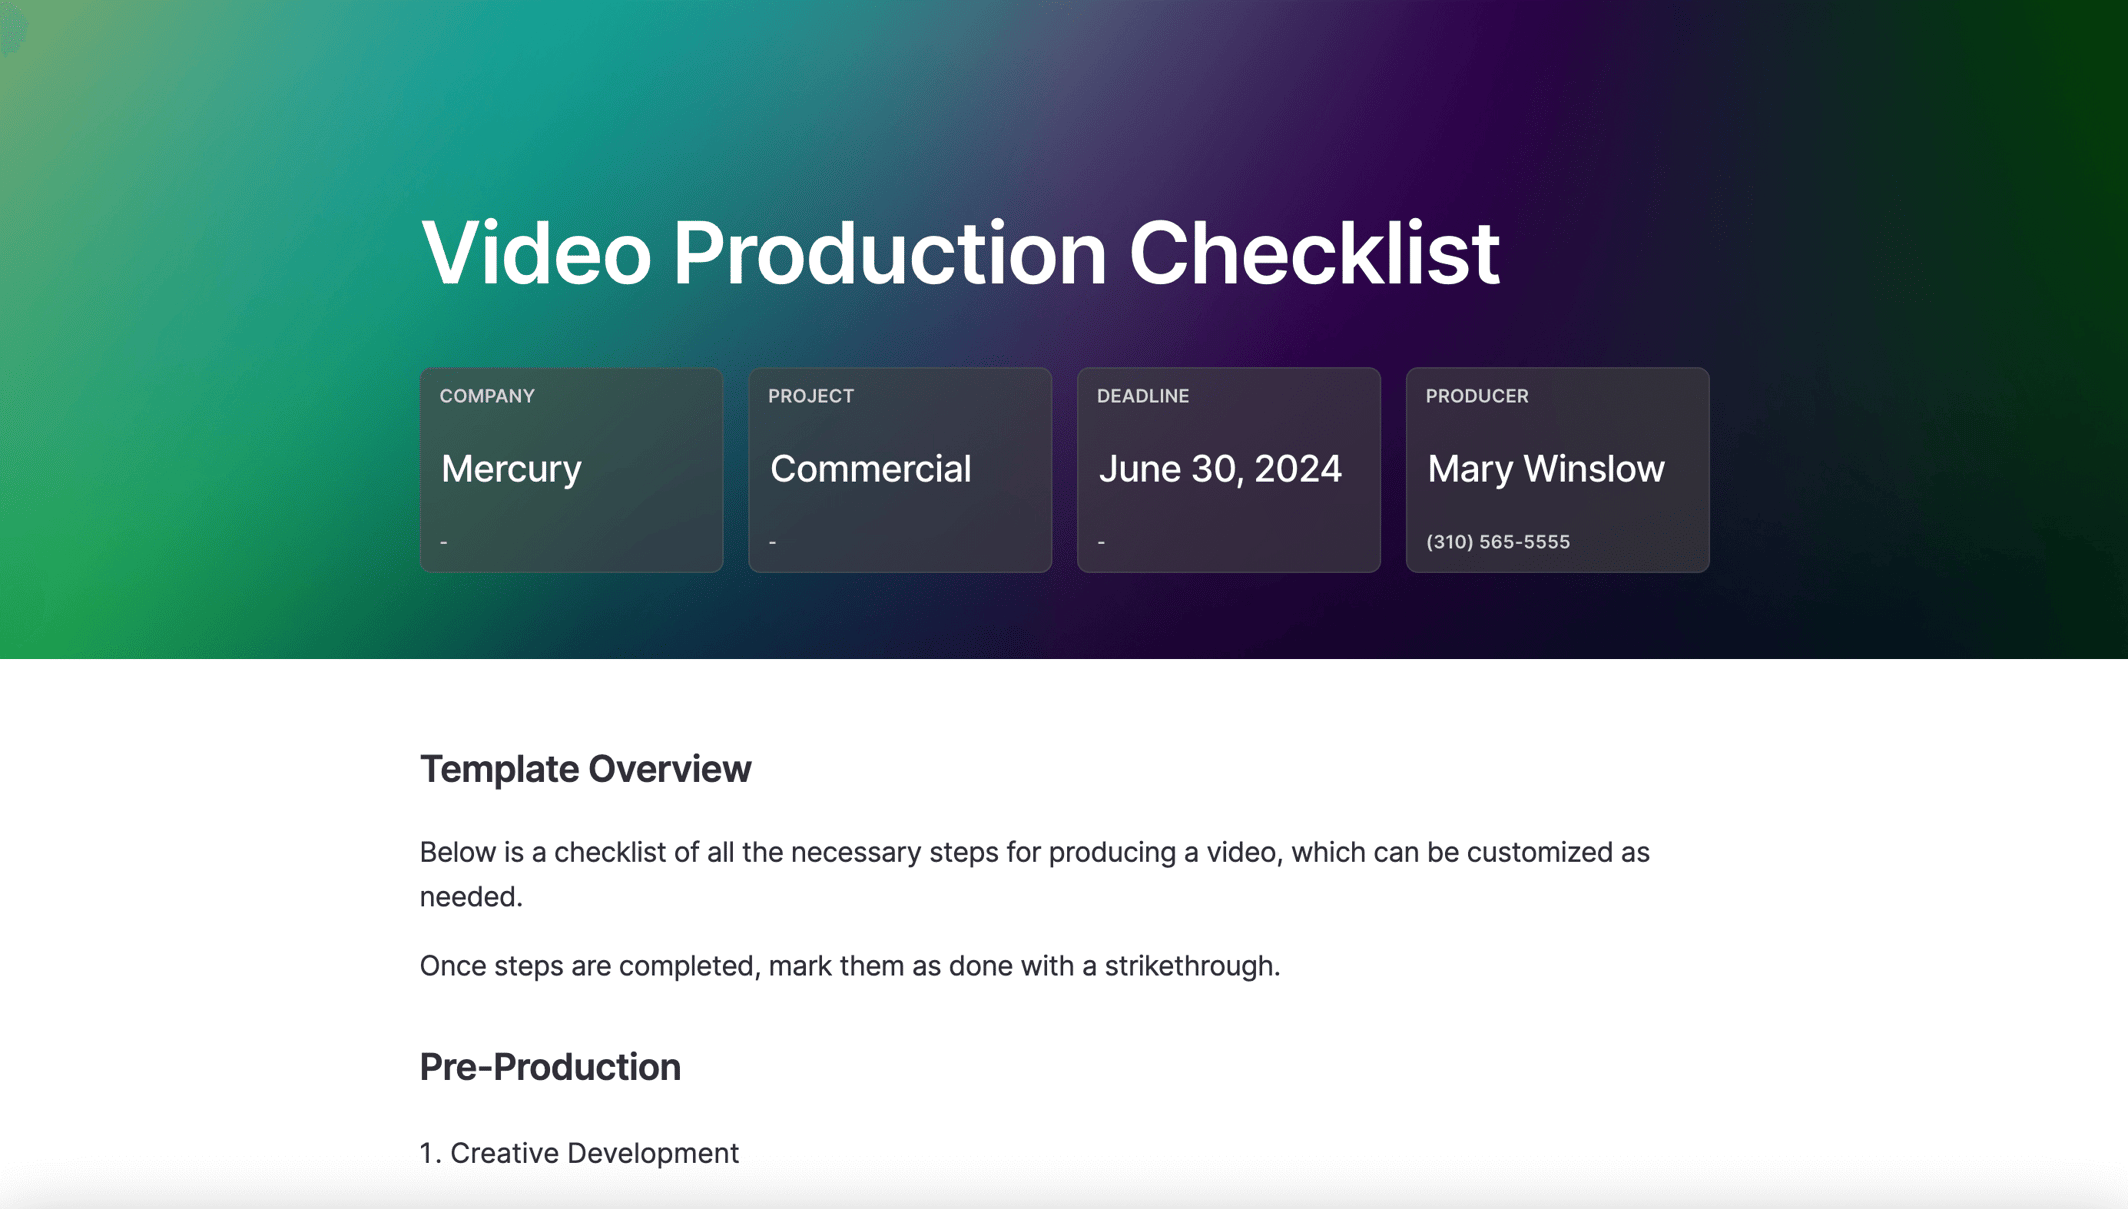 https://3389140.fs1.hubspotusercontent-na1.net/hubfs/3389140/video%20production%20checklist%20cover.png